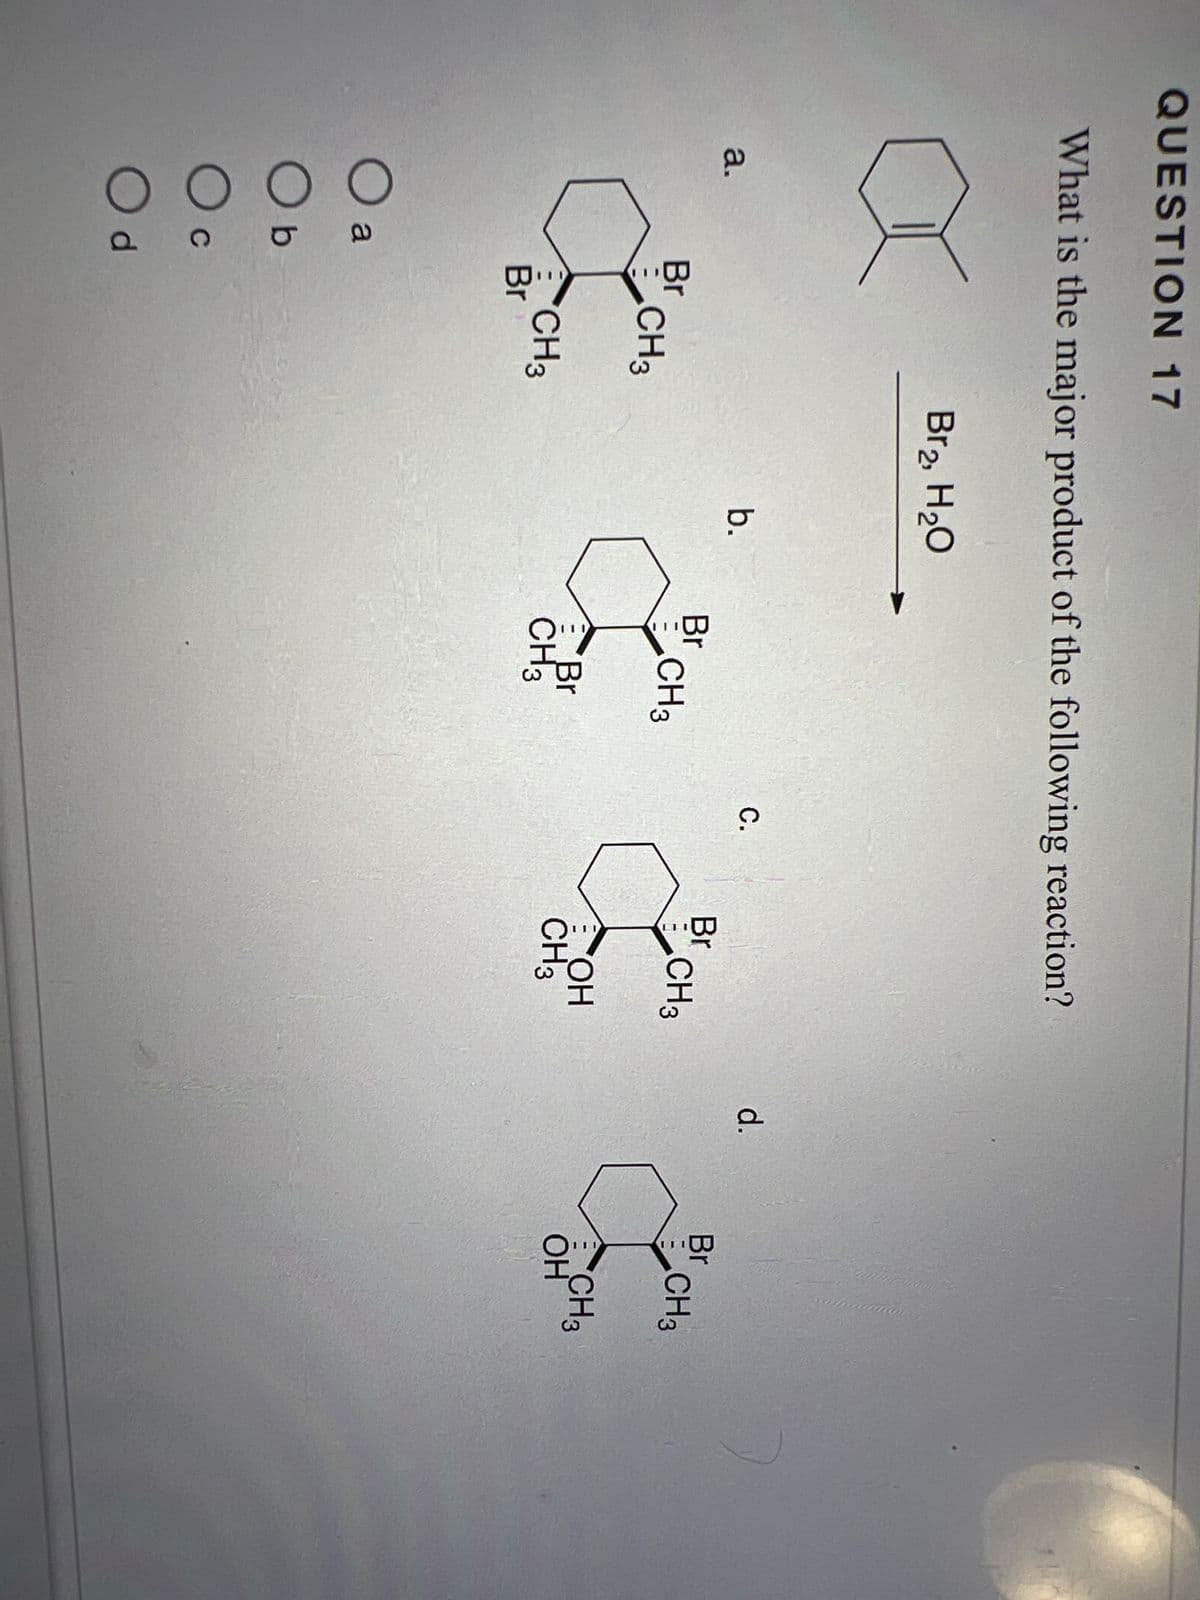 QUESTION 17
What is the major product of the following reaction?
a.
Br
a
Br
O
00
a
O b
C
Od
CH3
CH3
Br₂, H₂O
b.
Br
CH3
Br
CH3
C.
Br
CH3
OH
CH3
d.
Br
CH3
CH3
OH